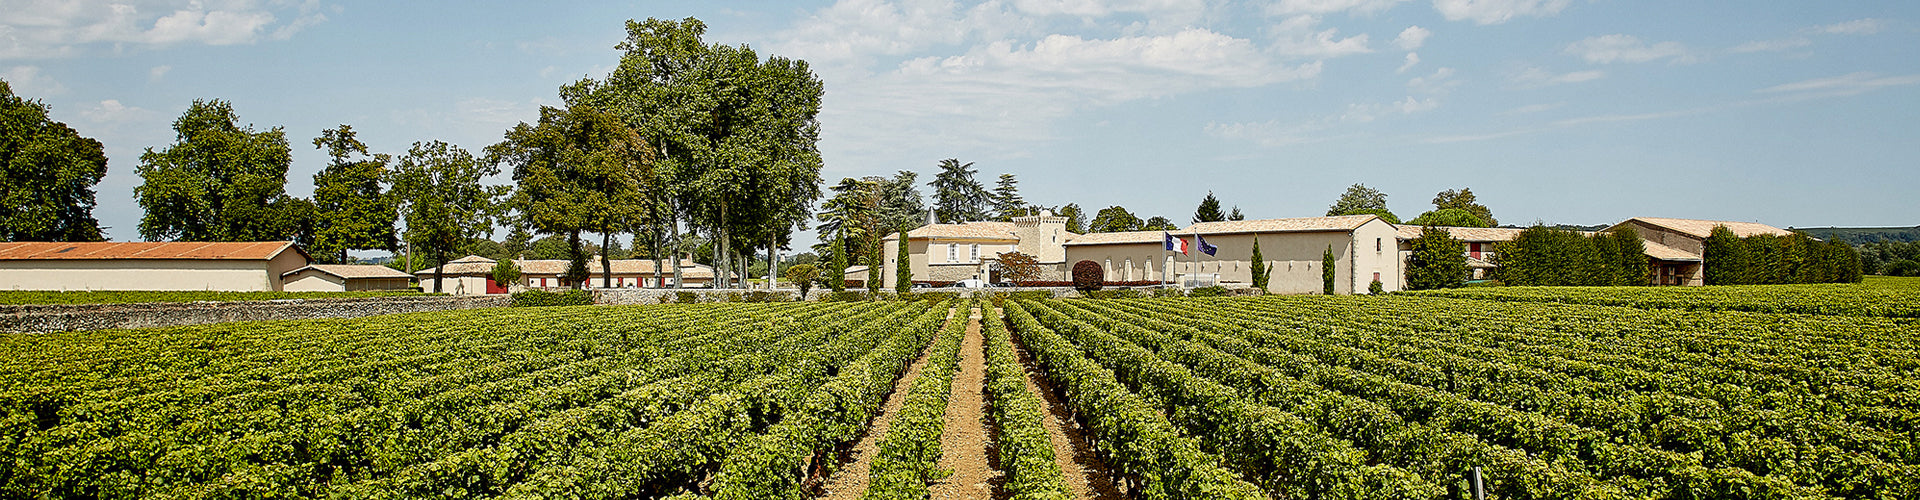 Château Coutet Vineyards and Winery Buildings